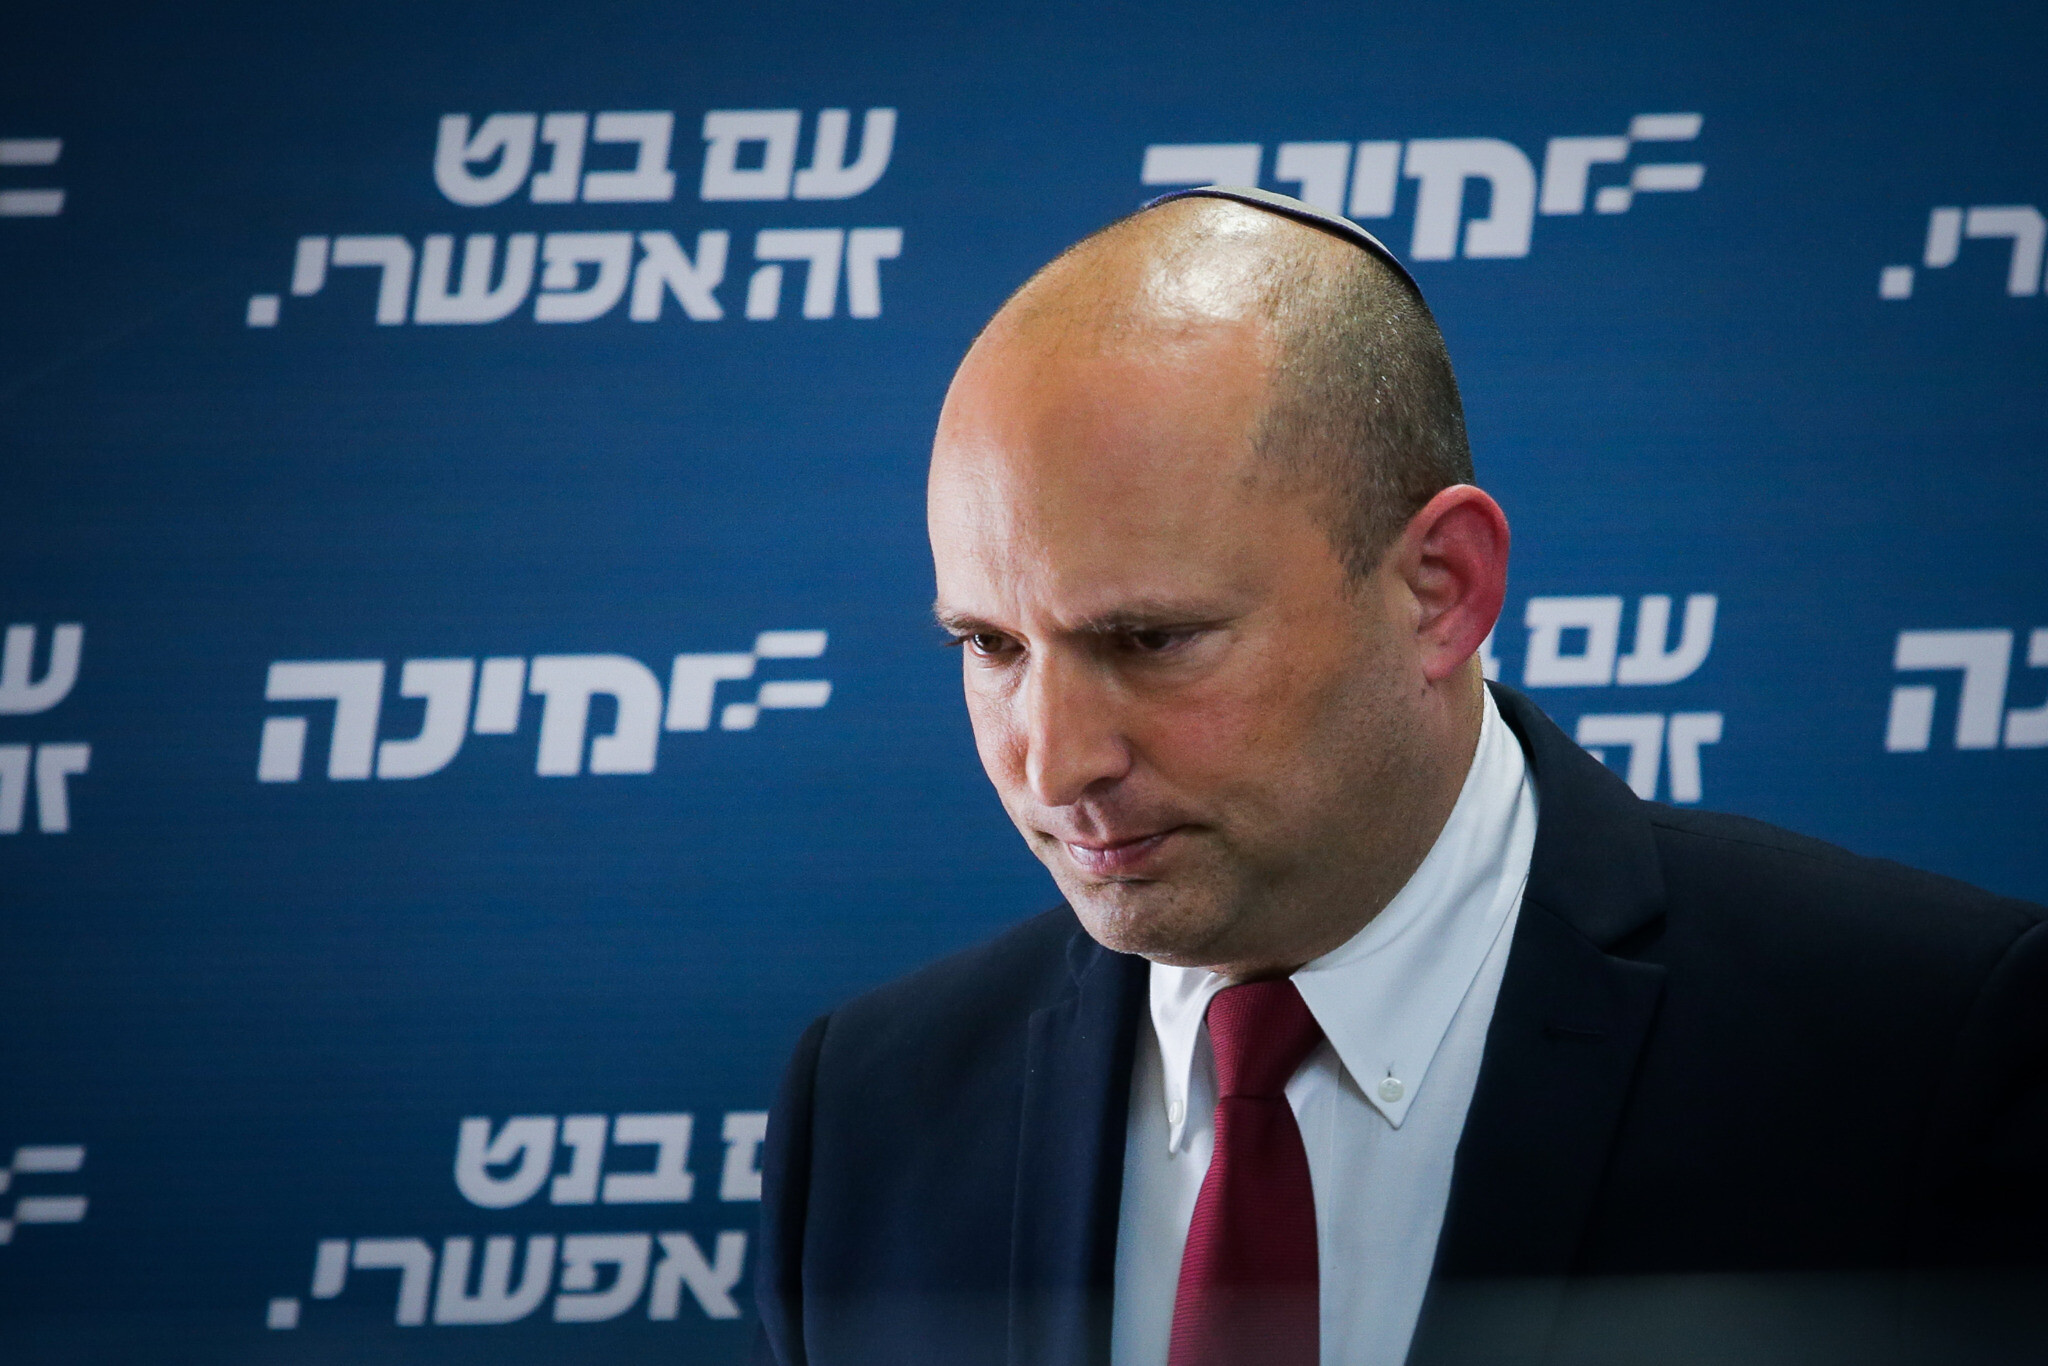 Police said looking into threats against Bennett on social media | The Times of Israel